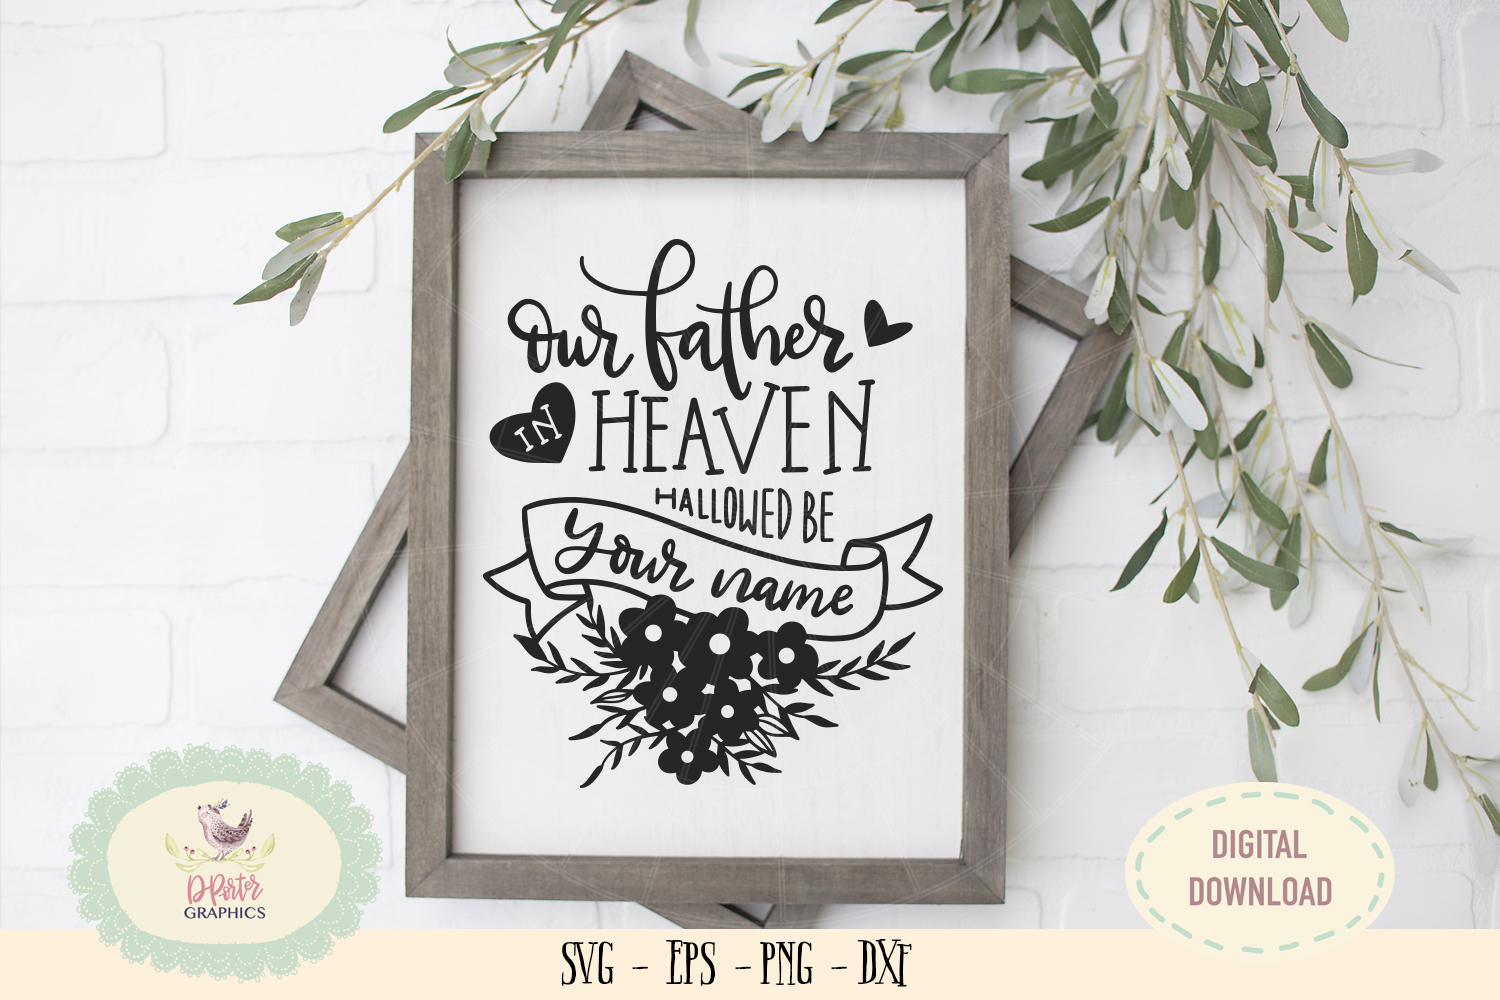 Download Our father in heaven allowed be your name SVG PNG